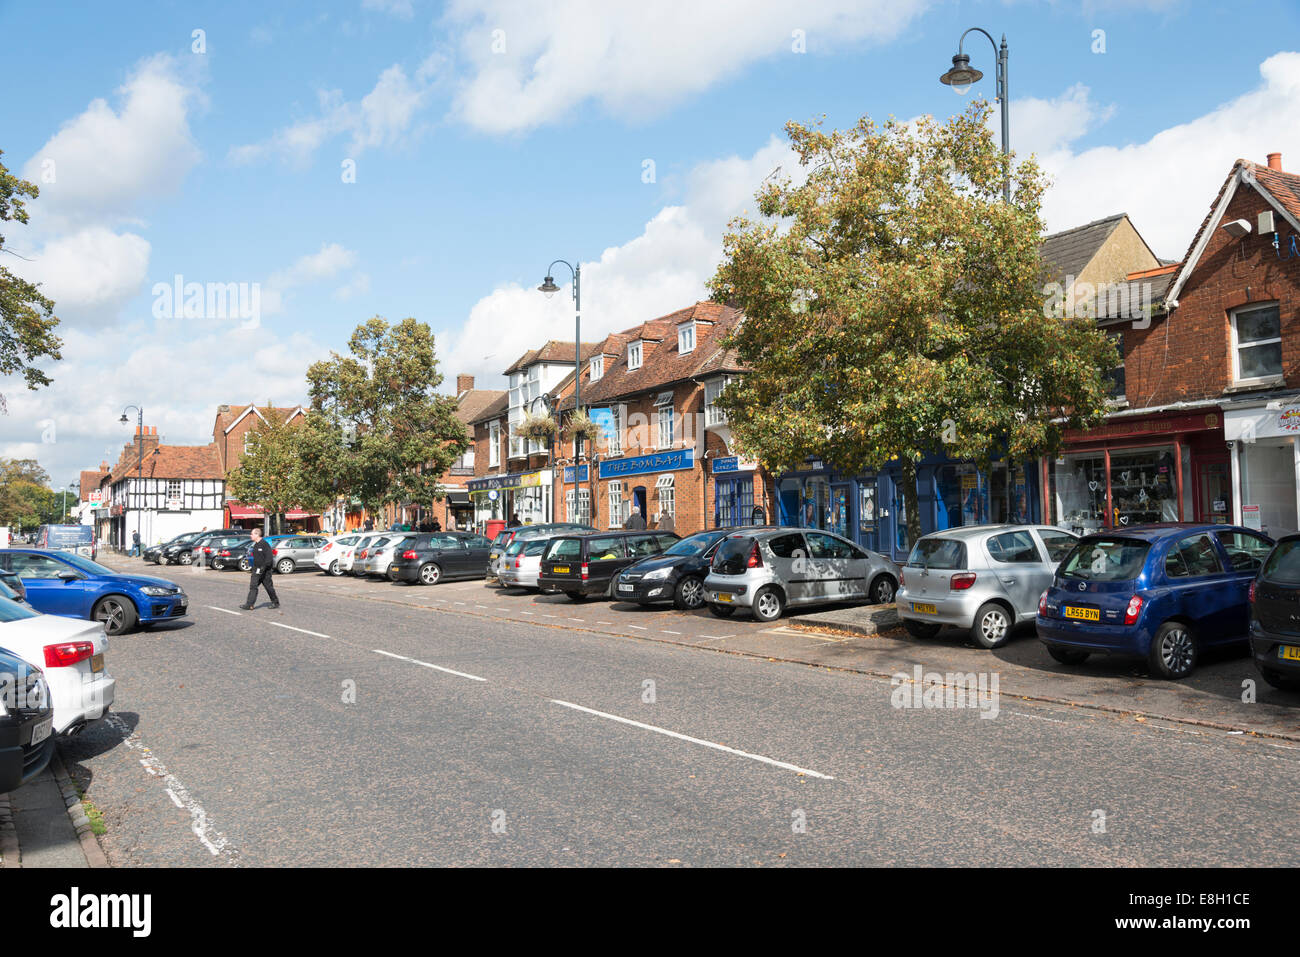 Shops and the High street in Stevenage Old Town Hertfordshire UK Stock Photo